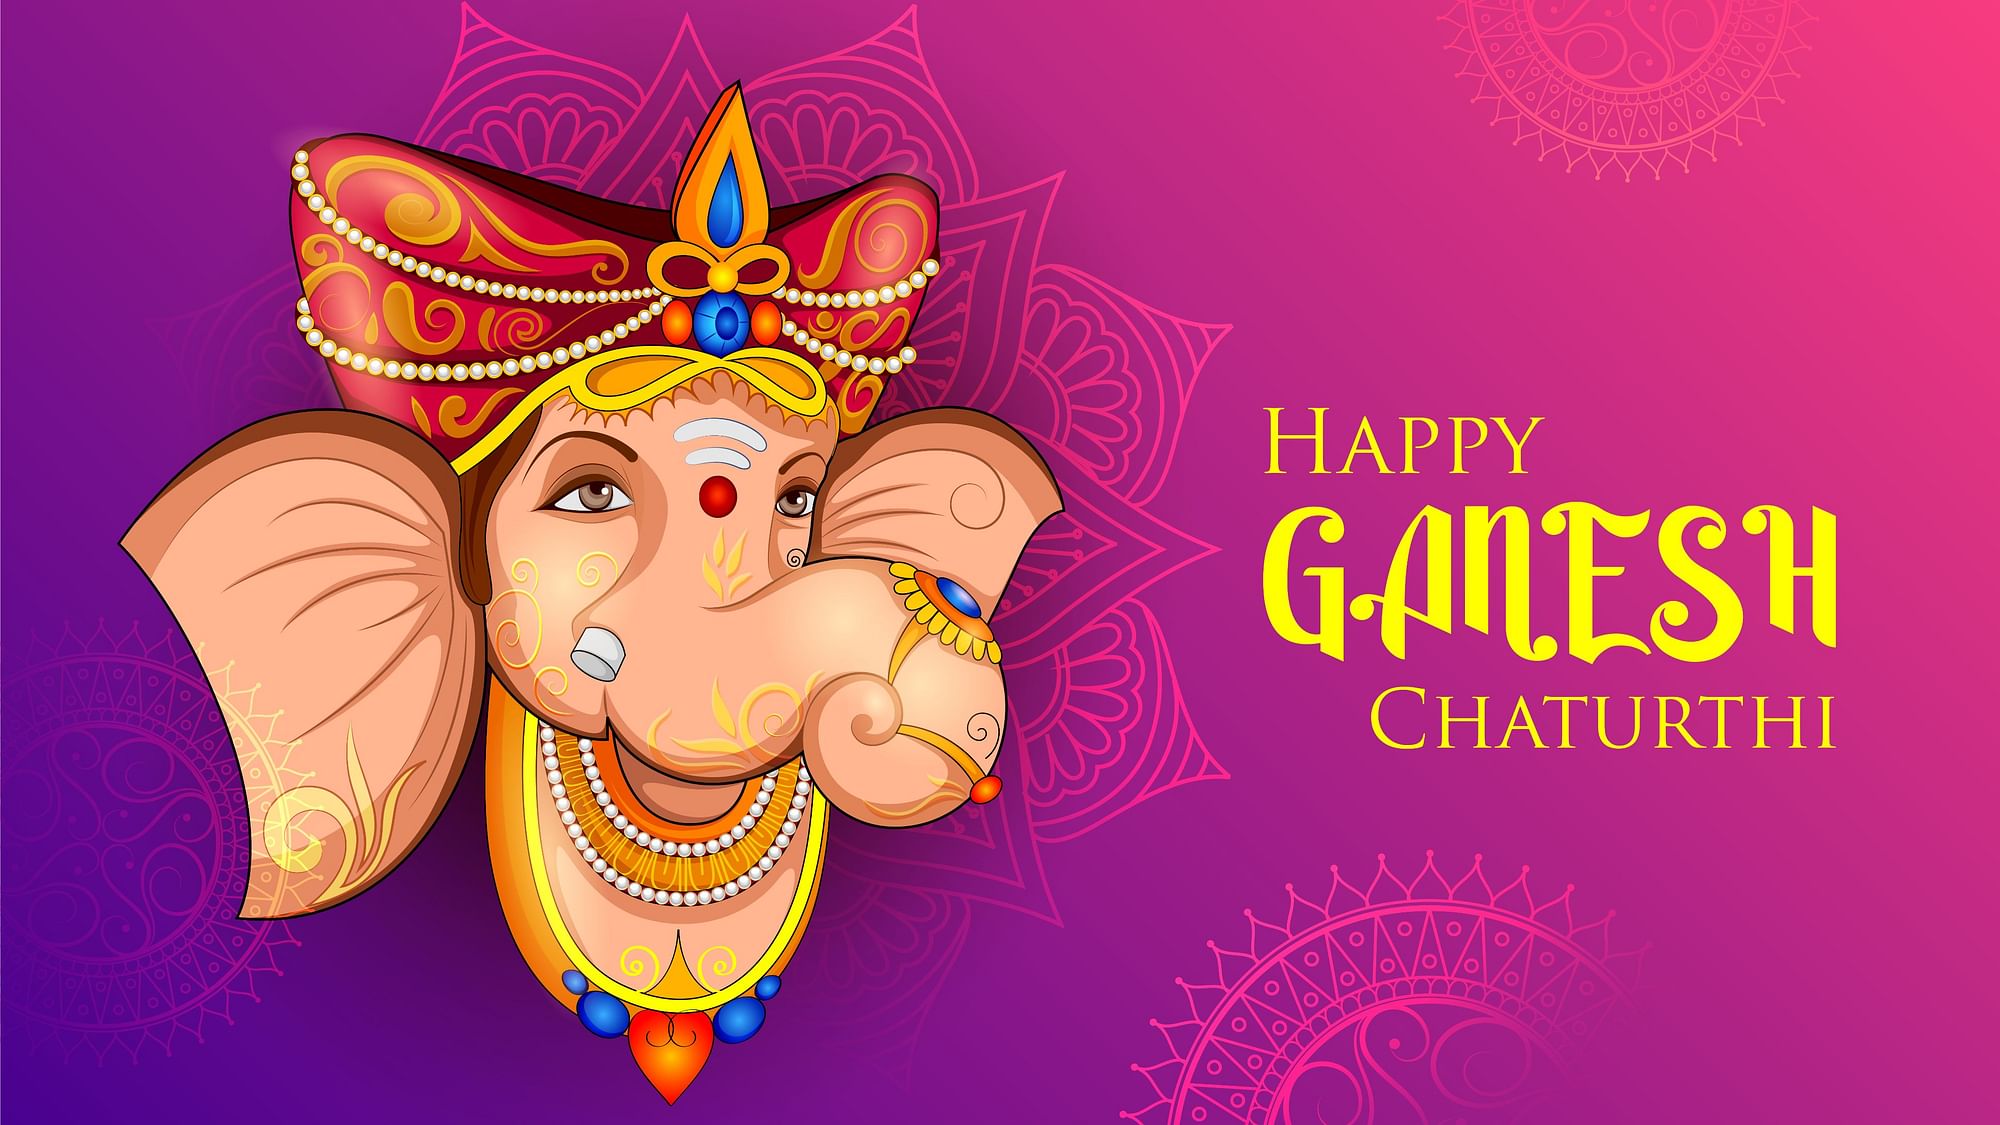 Ganesh Chaturthi 2019: Here are some images, quotes, messages for you to send your friends, relatives on this auspicious occasion.